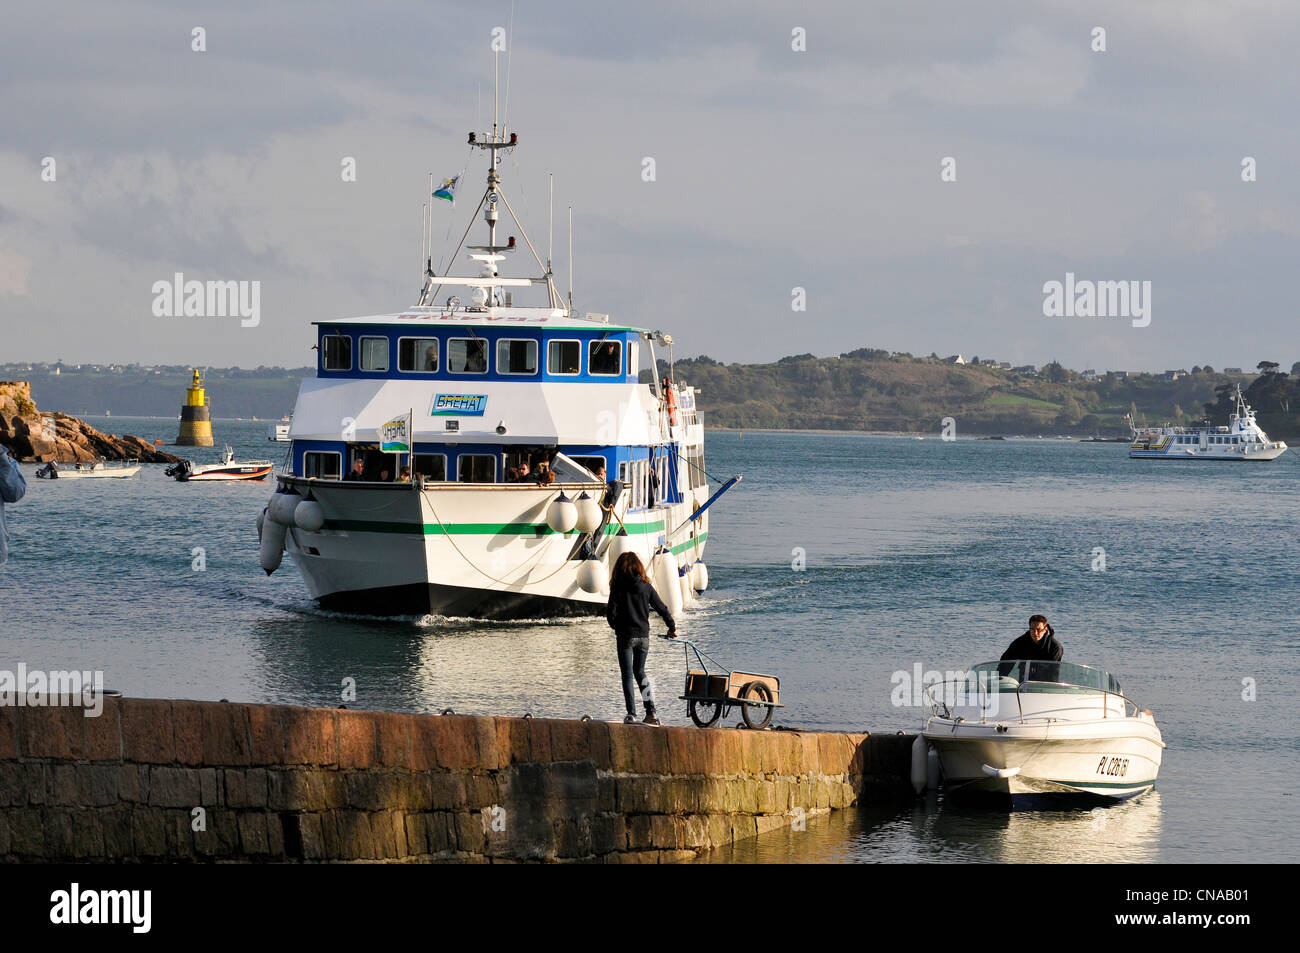 France, Cotes d'Armor, Brehat island, Port Clos, arrival of one of the stars of Brehat Stock Photo